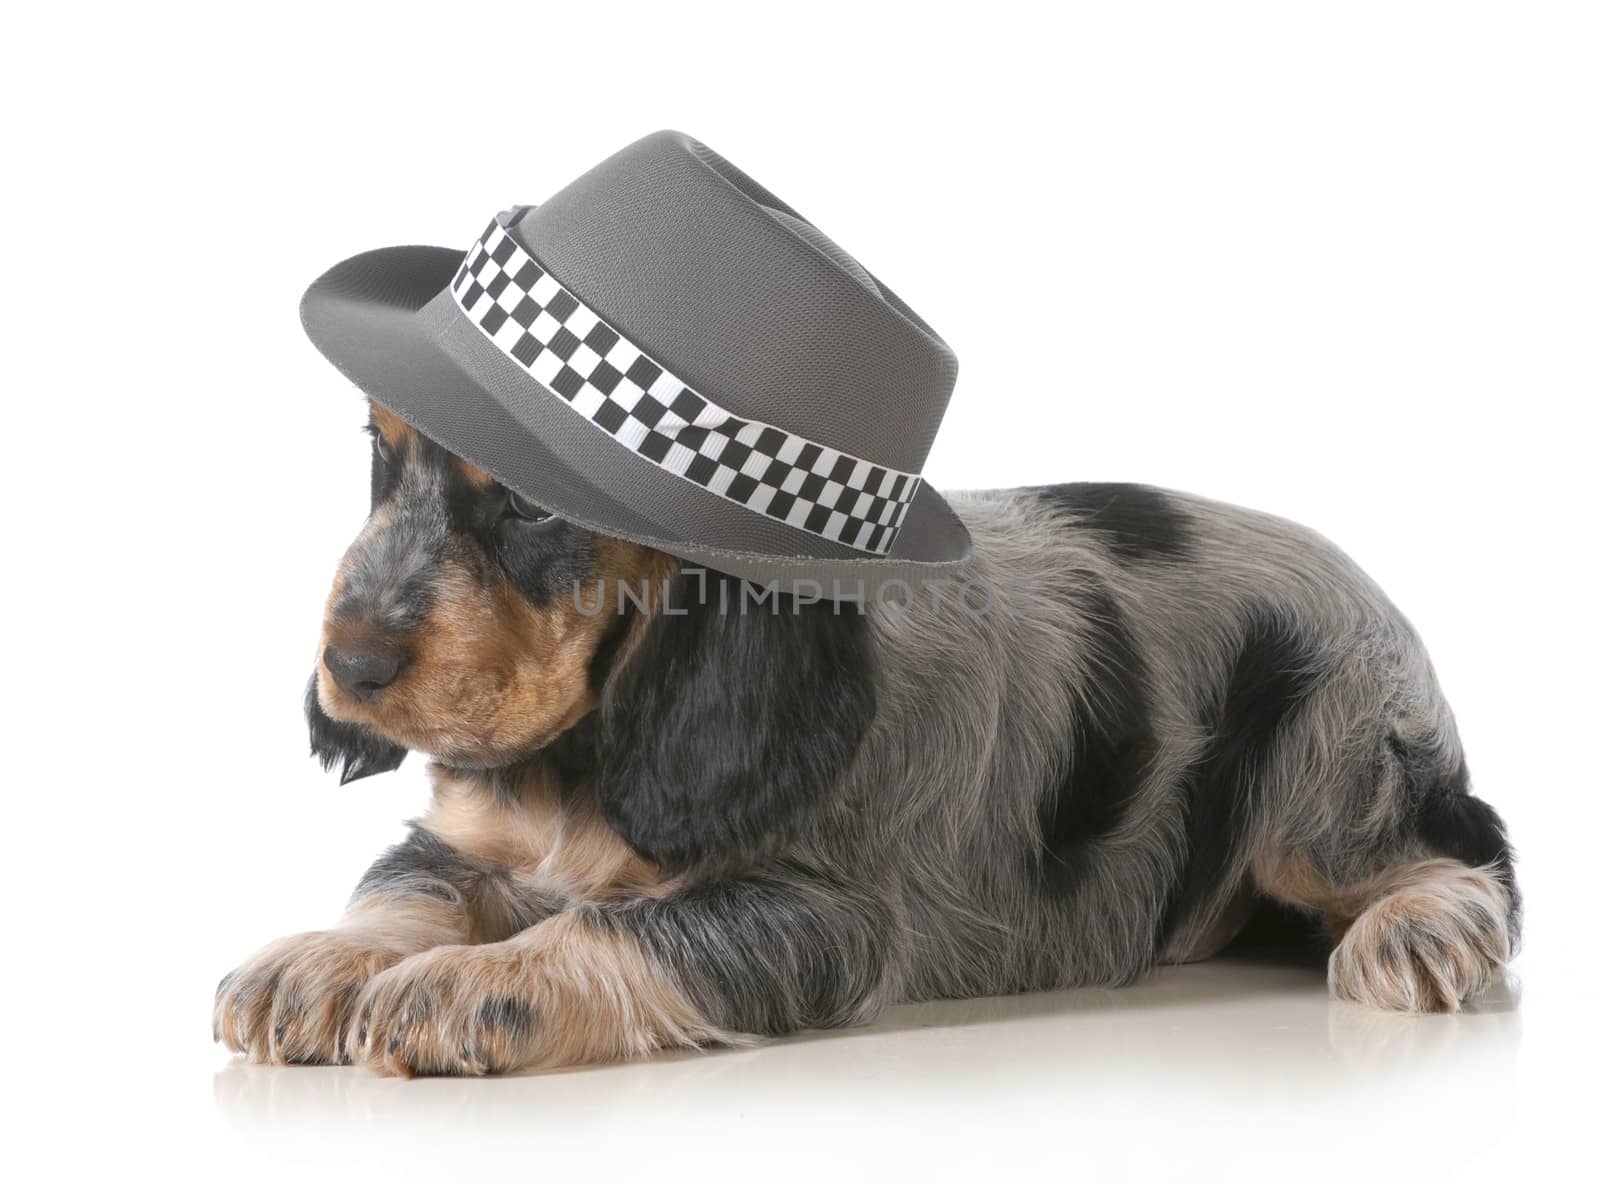 cute puppy - english cocker spaniel puppy wearing hat isolated on white background - 7 weeks old